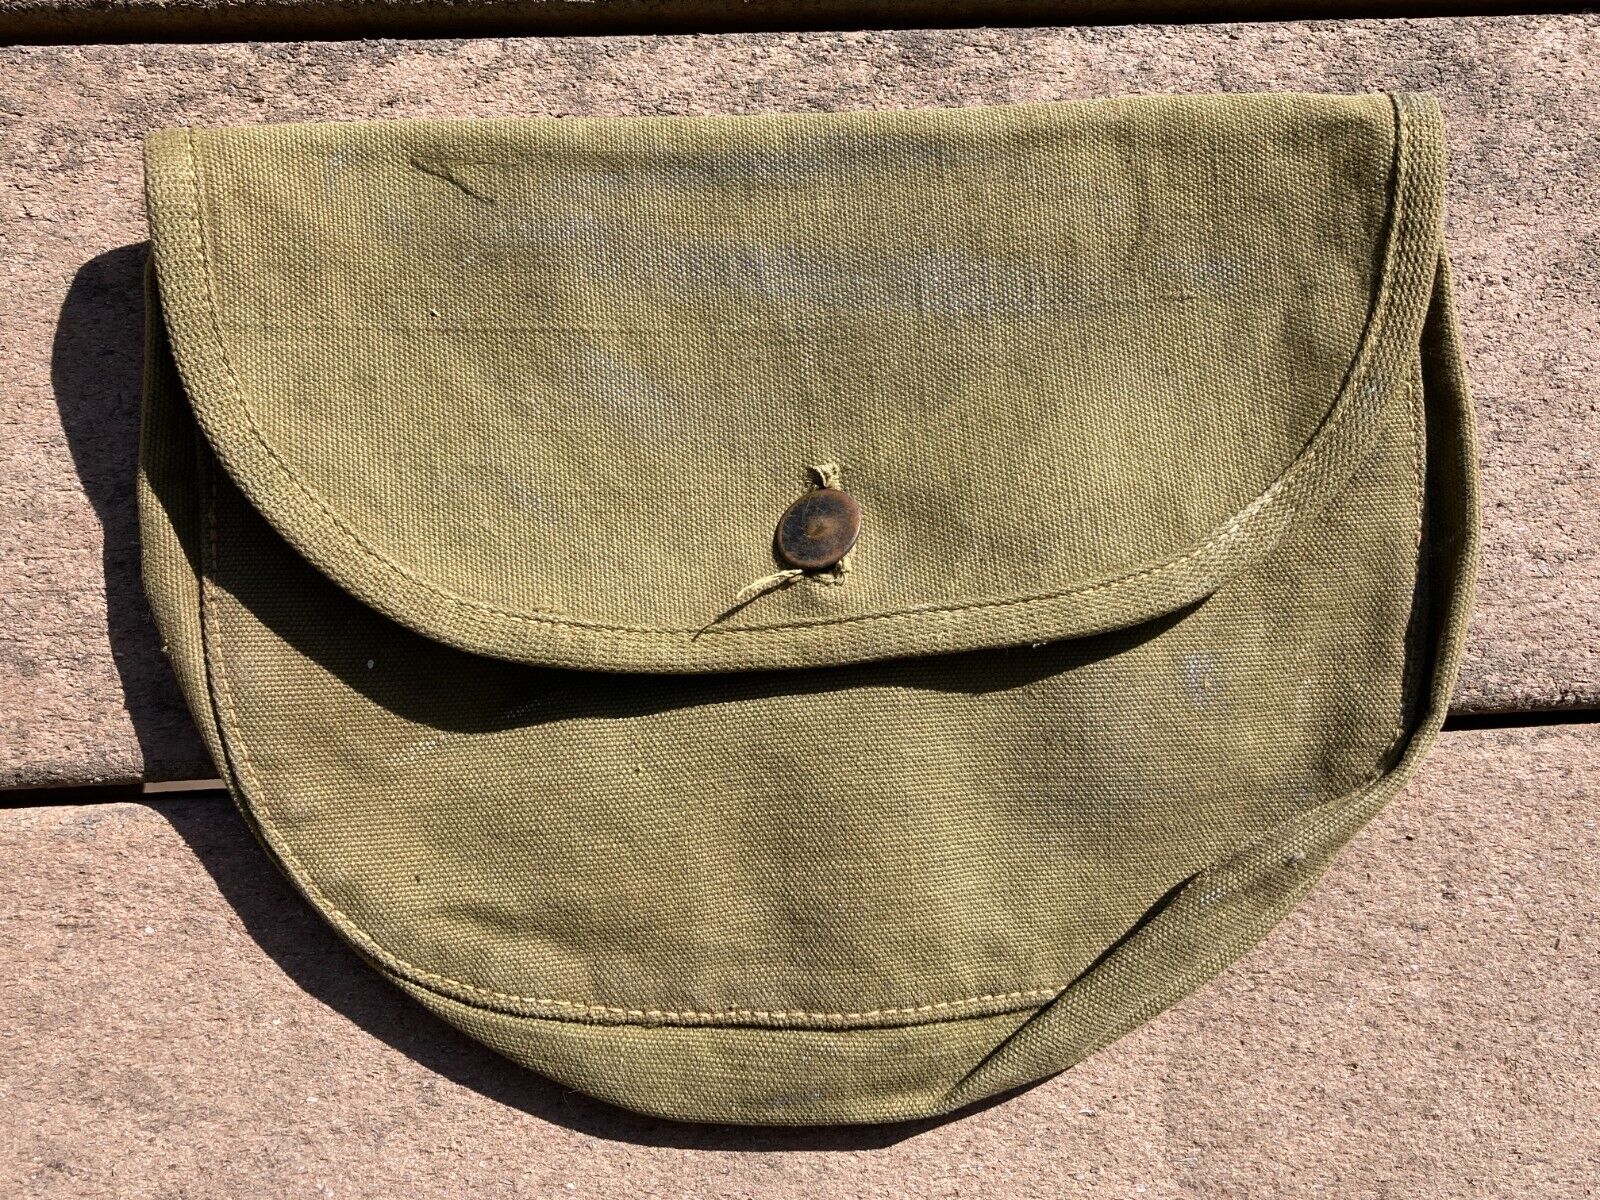 WW1 M1910 US ARMY MILITARY M1910 PEA GREEN MEAT CAN POUCH FIELD GEAR